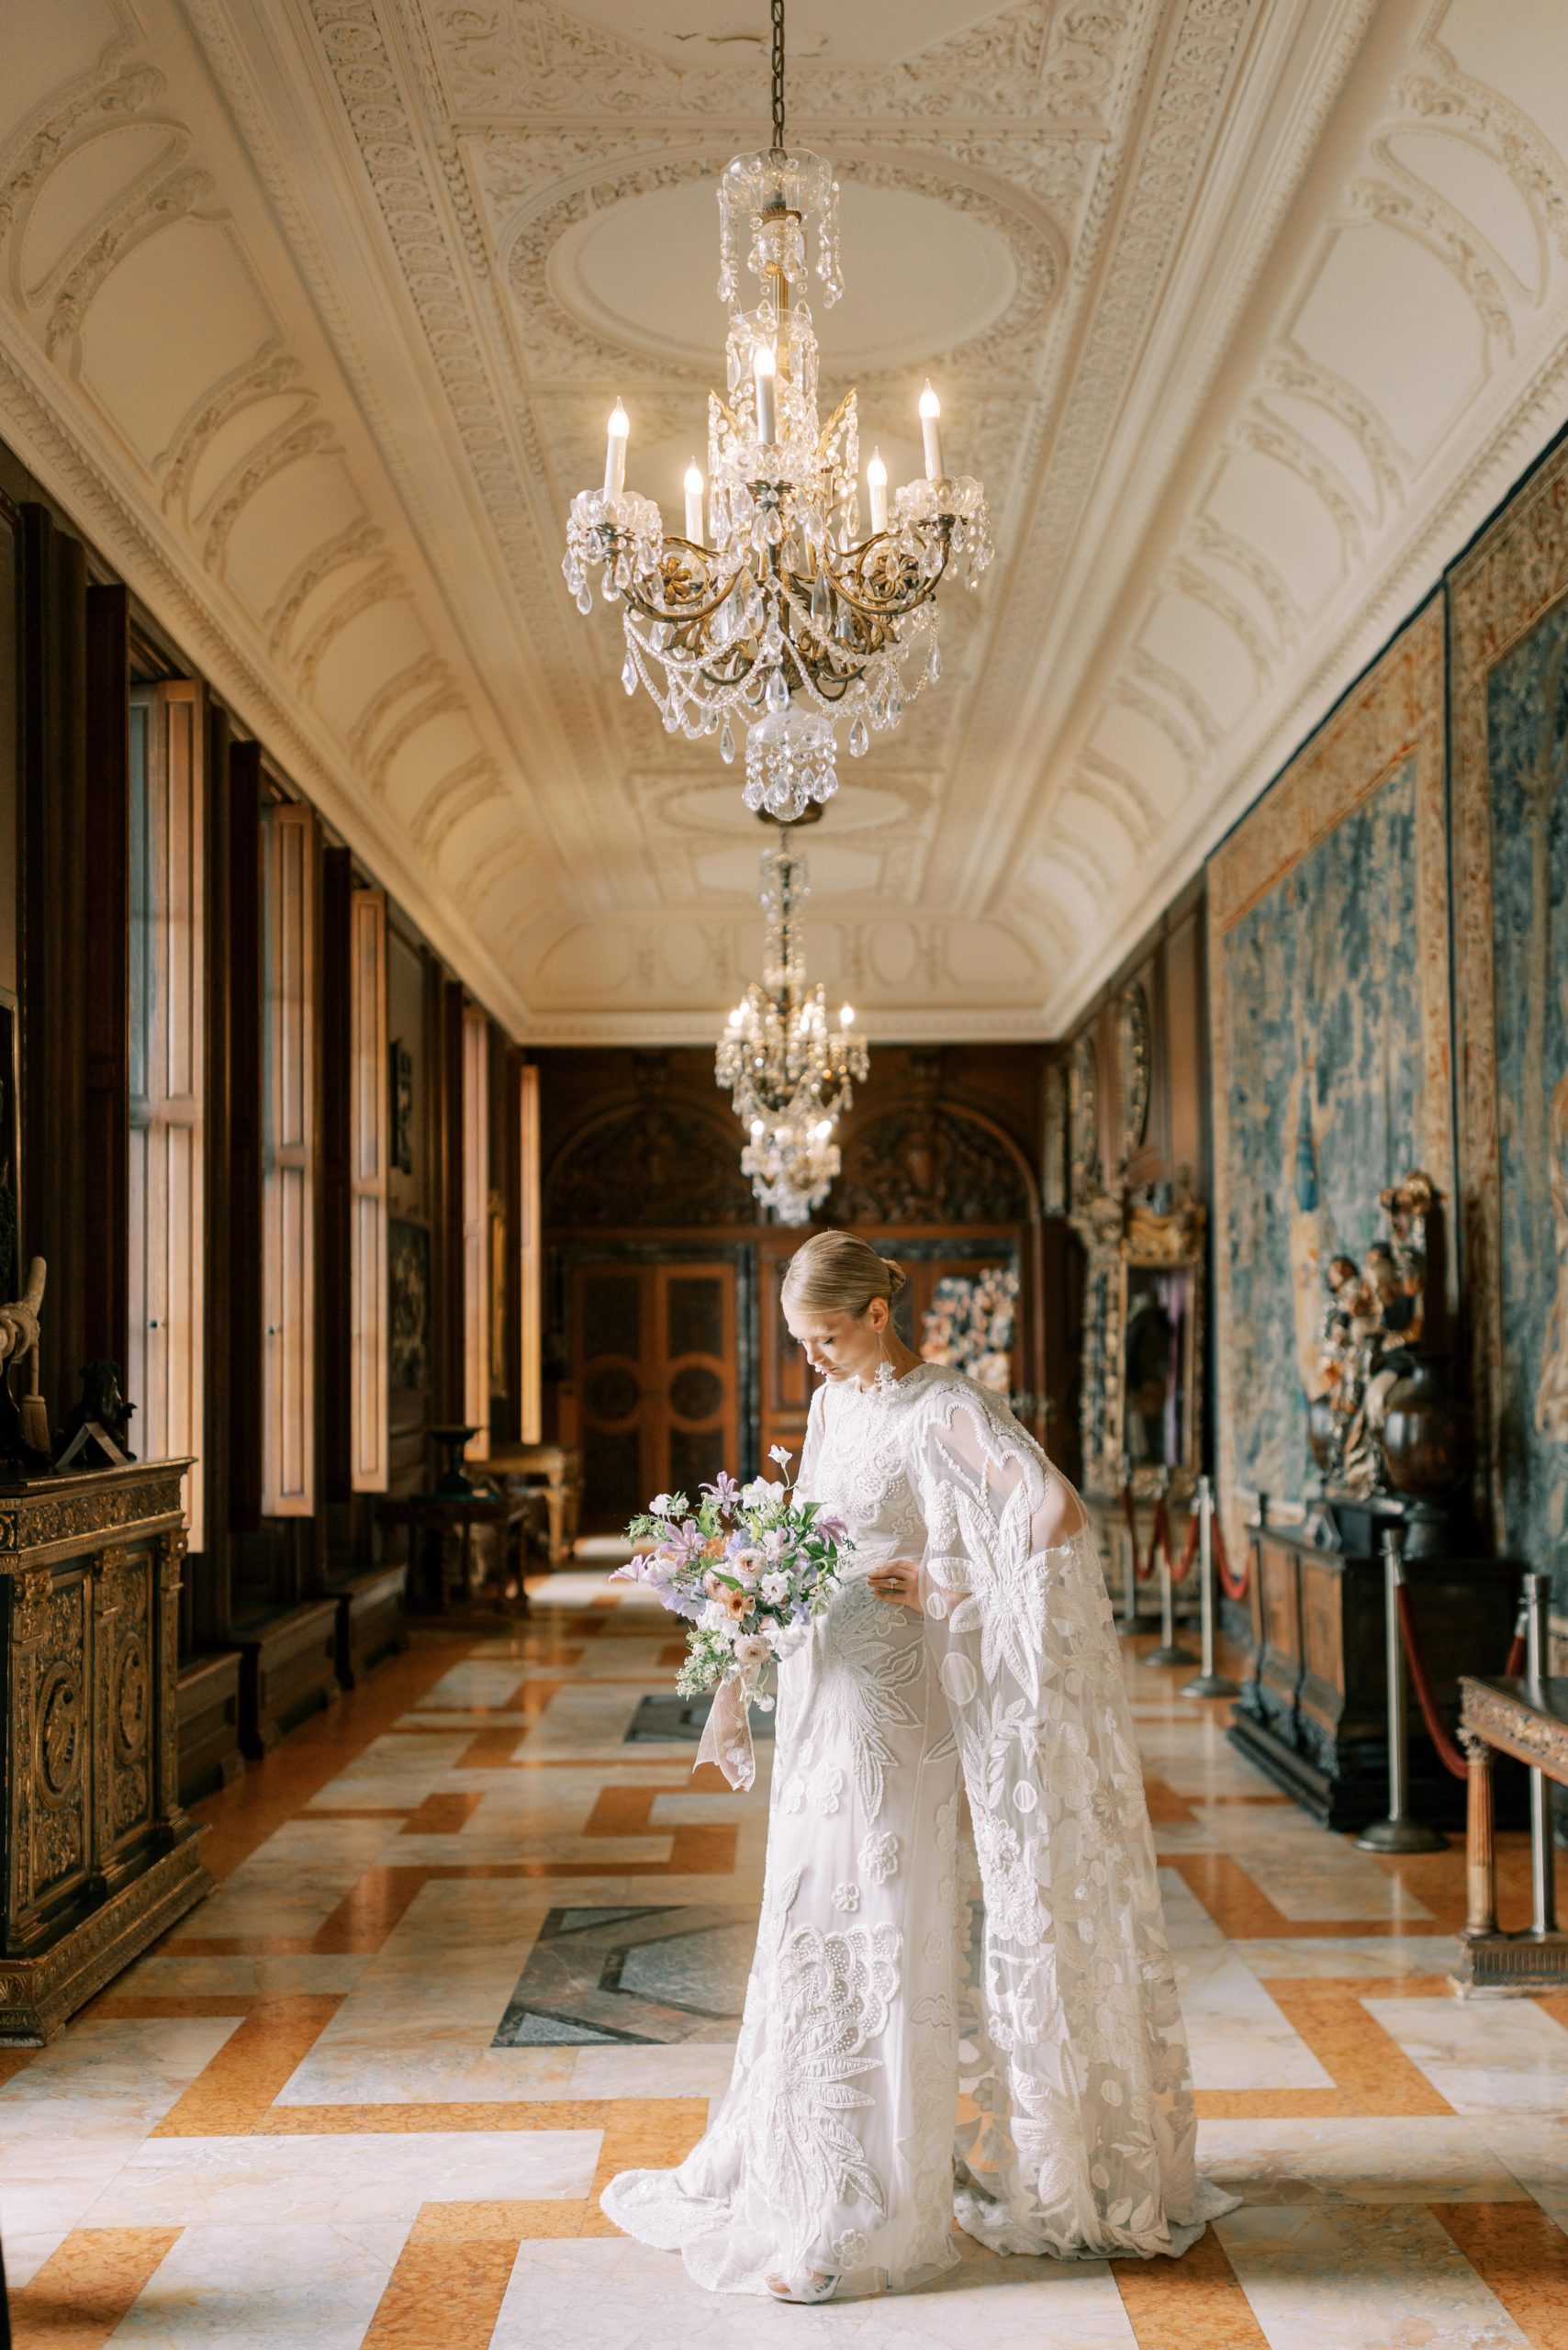 This opulent editorial photographed at The Anderson House in Washington, DC features four unique gowns by designer Naeem Khan.